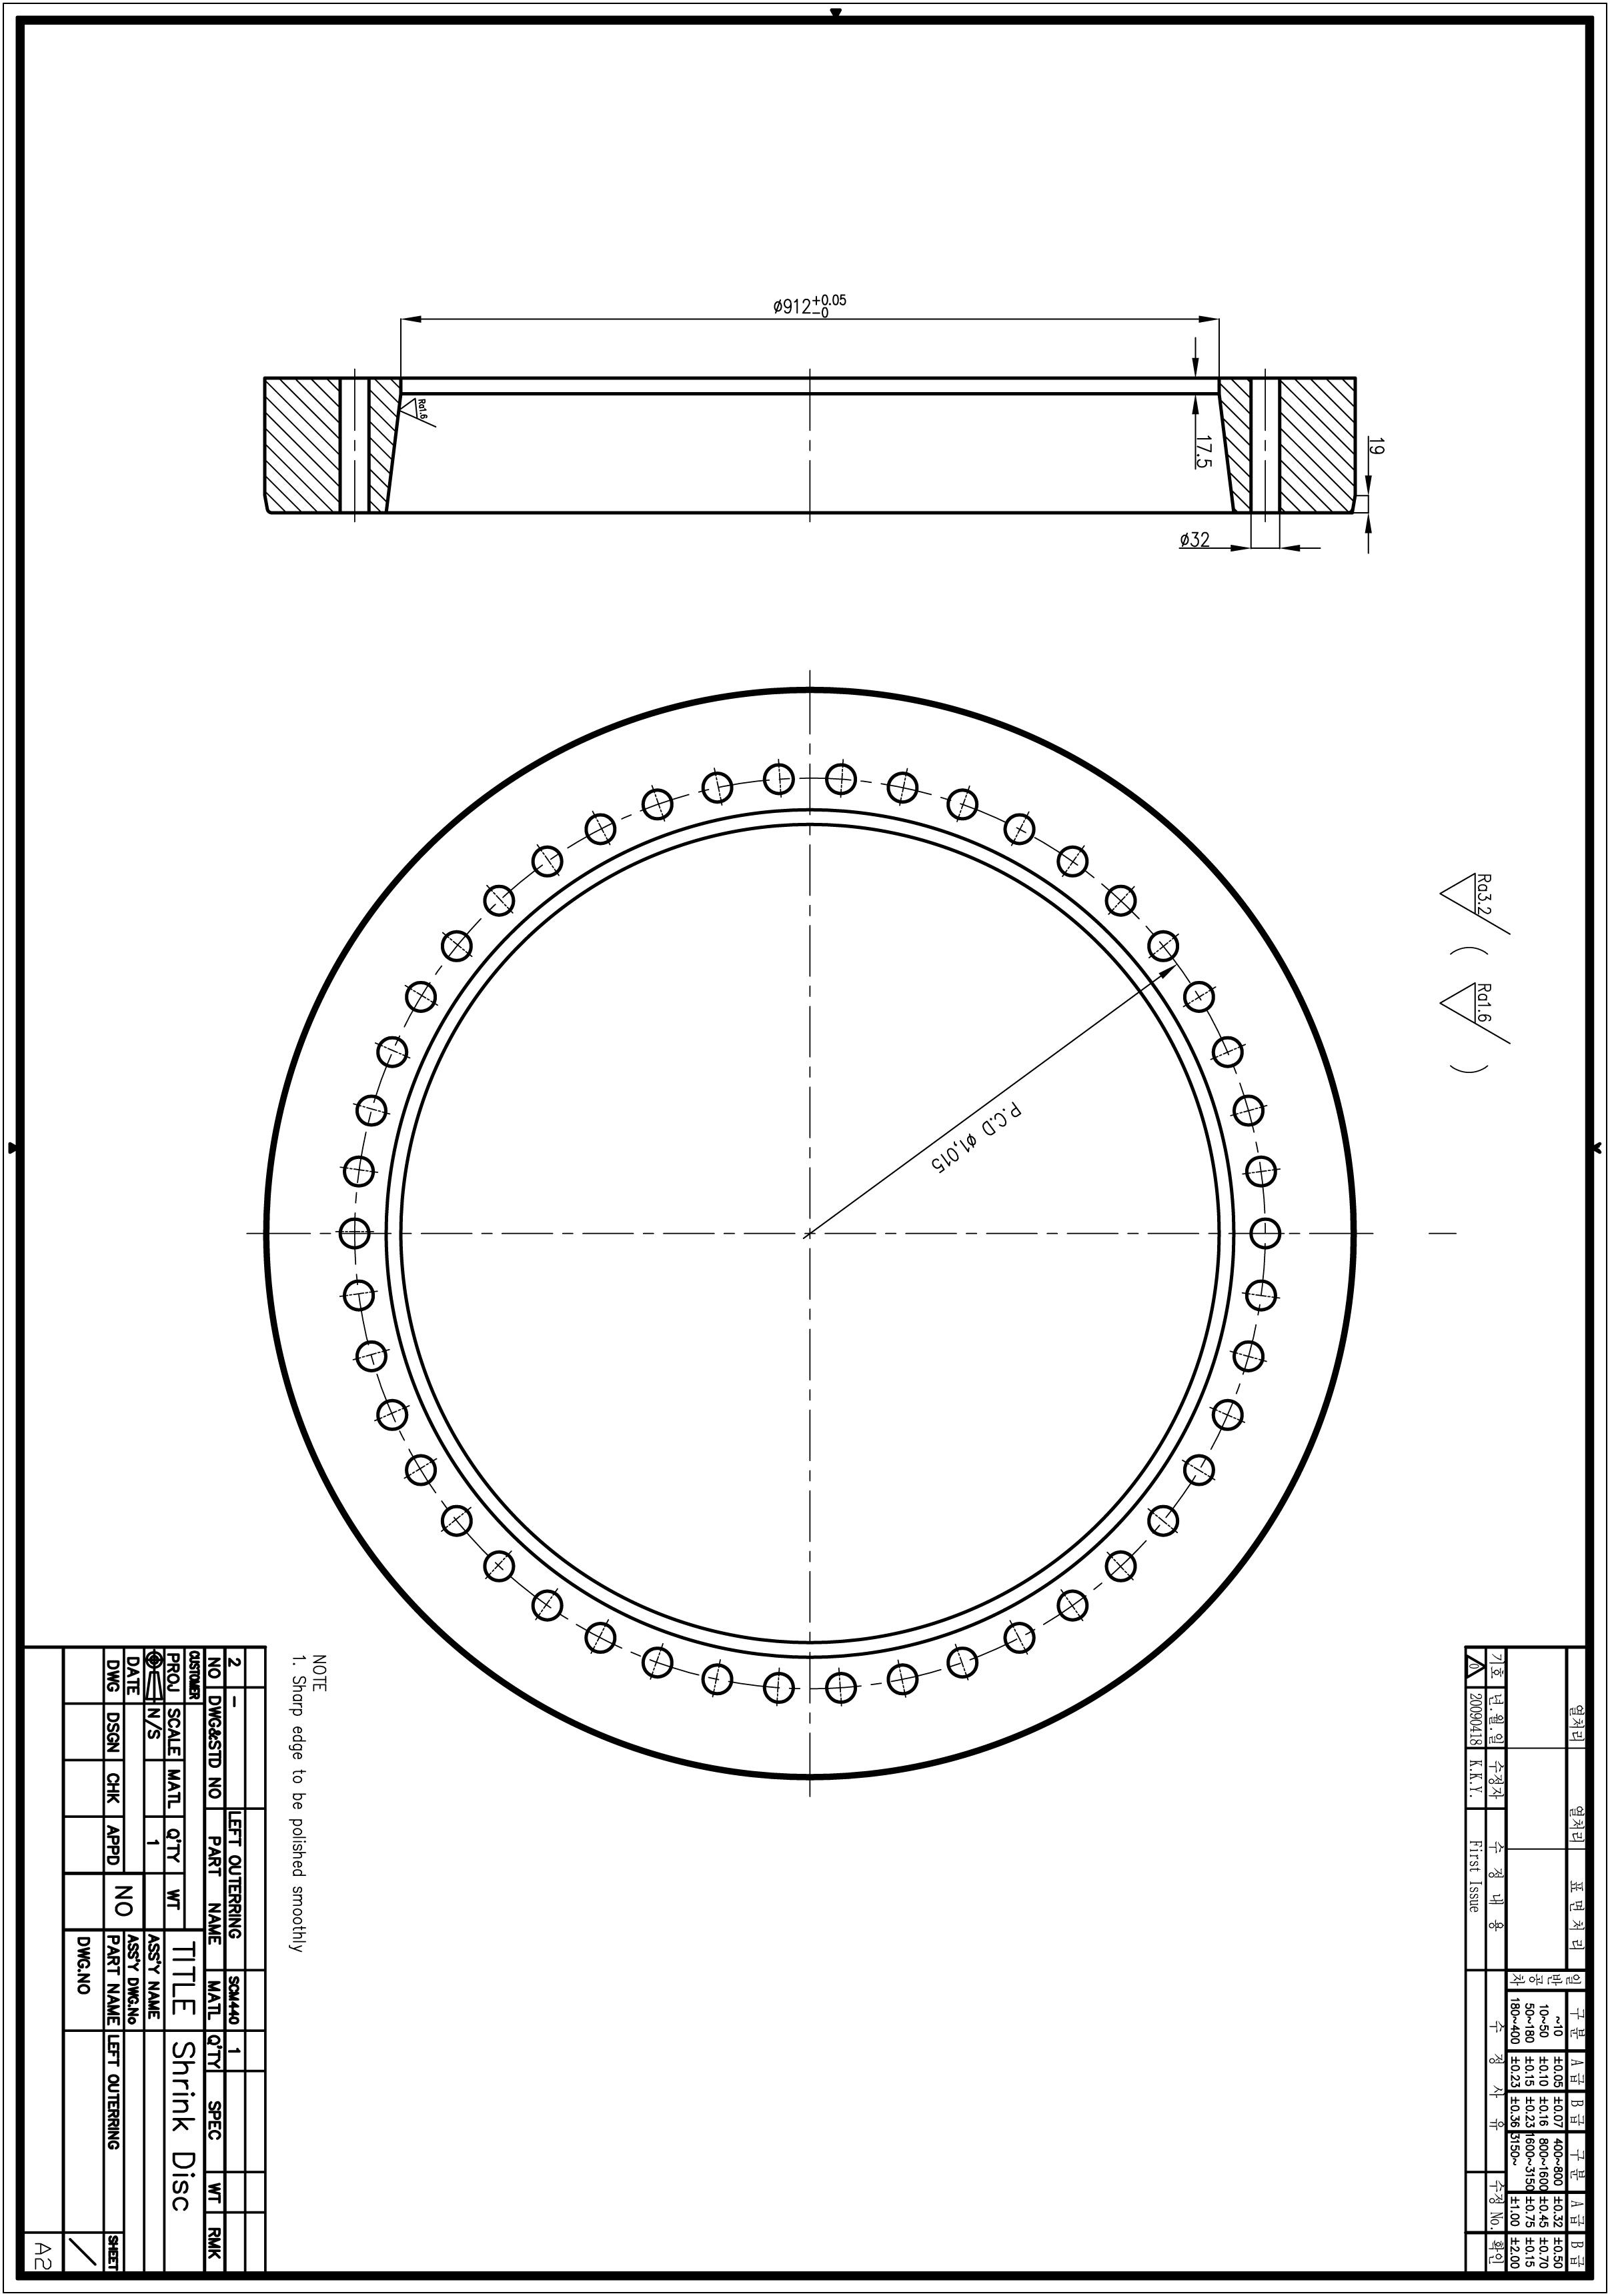 Part drawing of shrink disc with wedge ring - Outerring 1